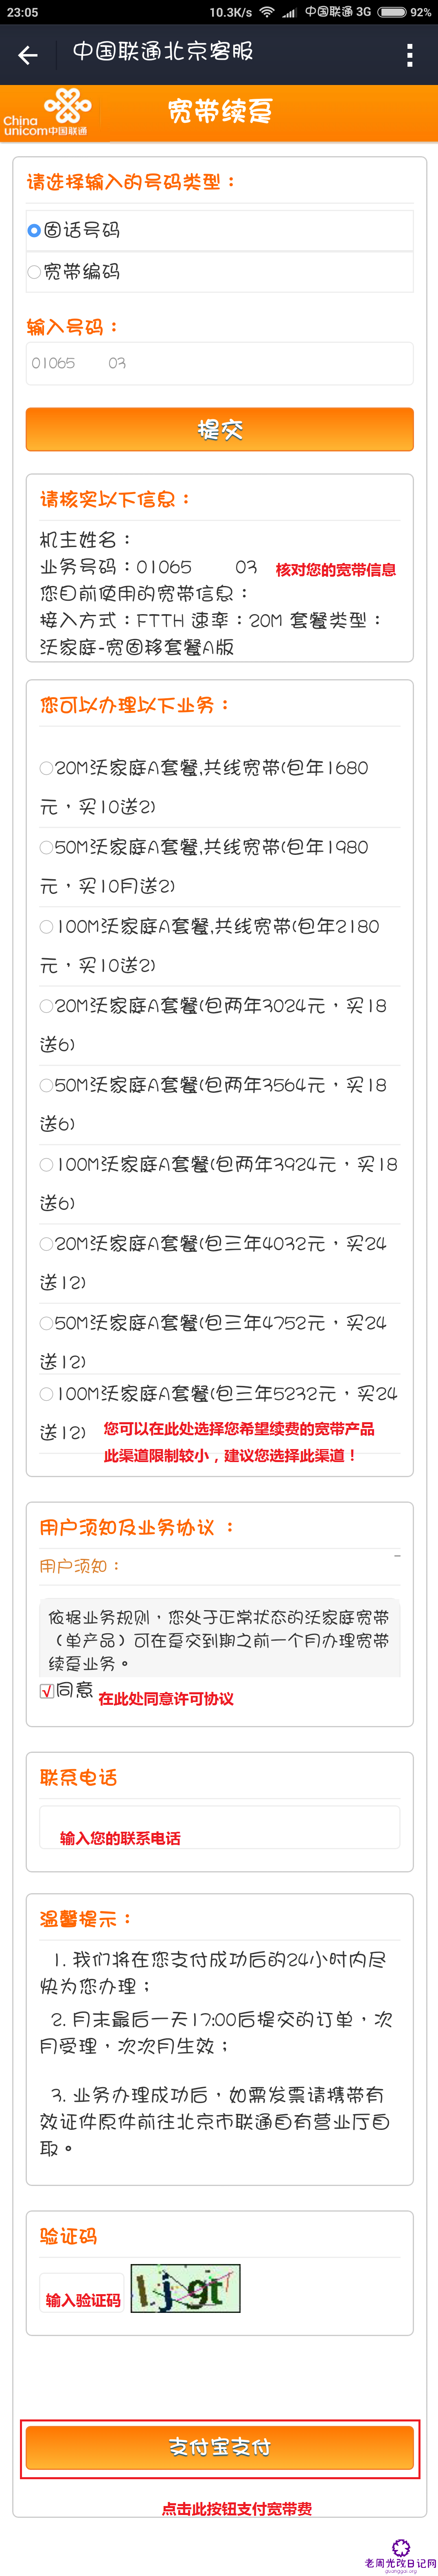 alipay-step5.png